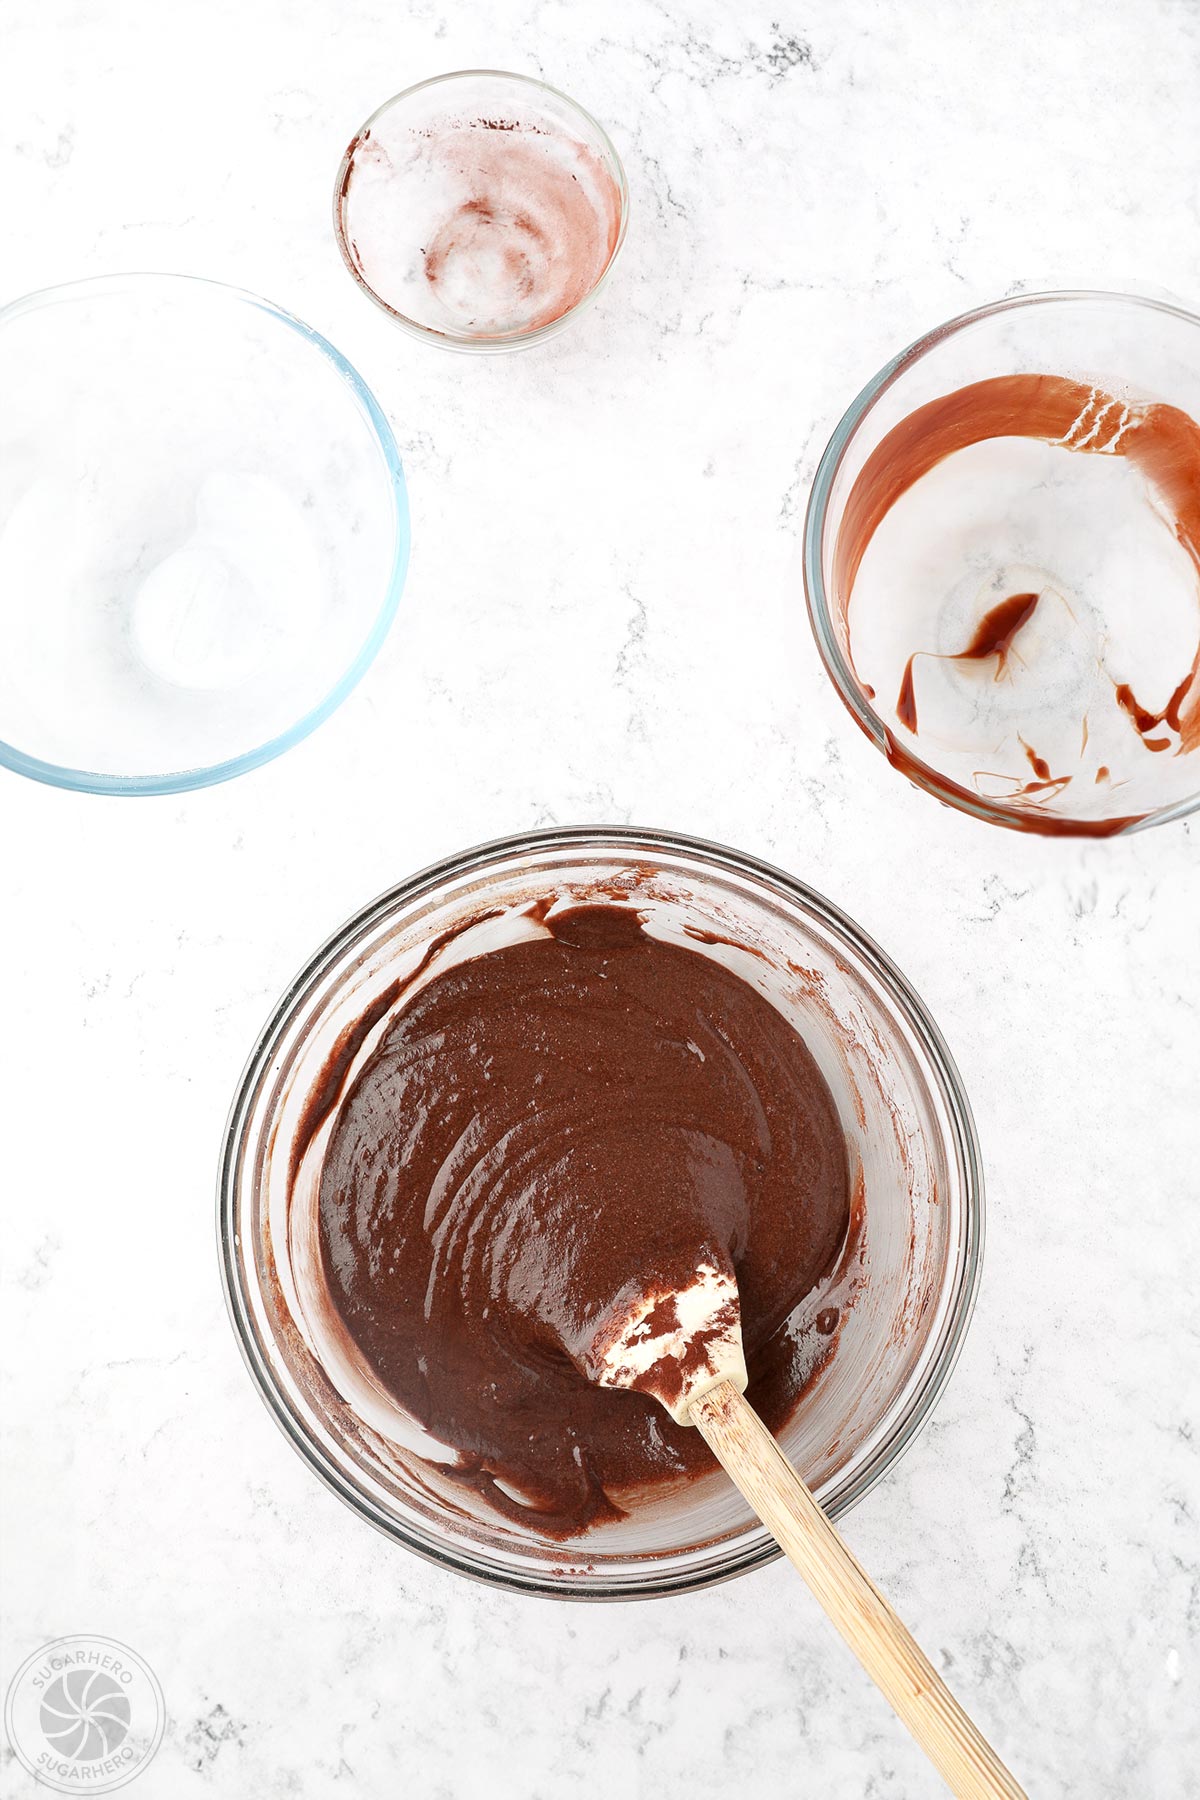 Brownie batter mixed in a large glass bowl.